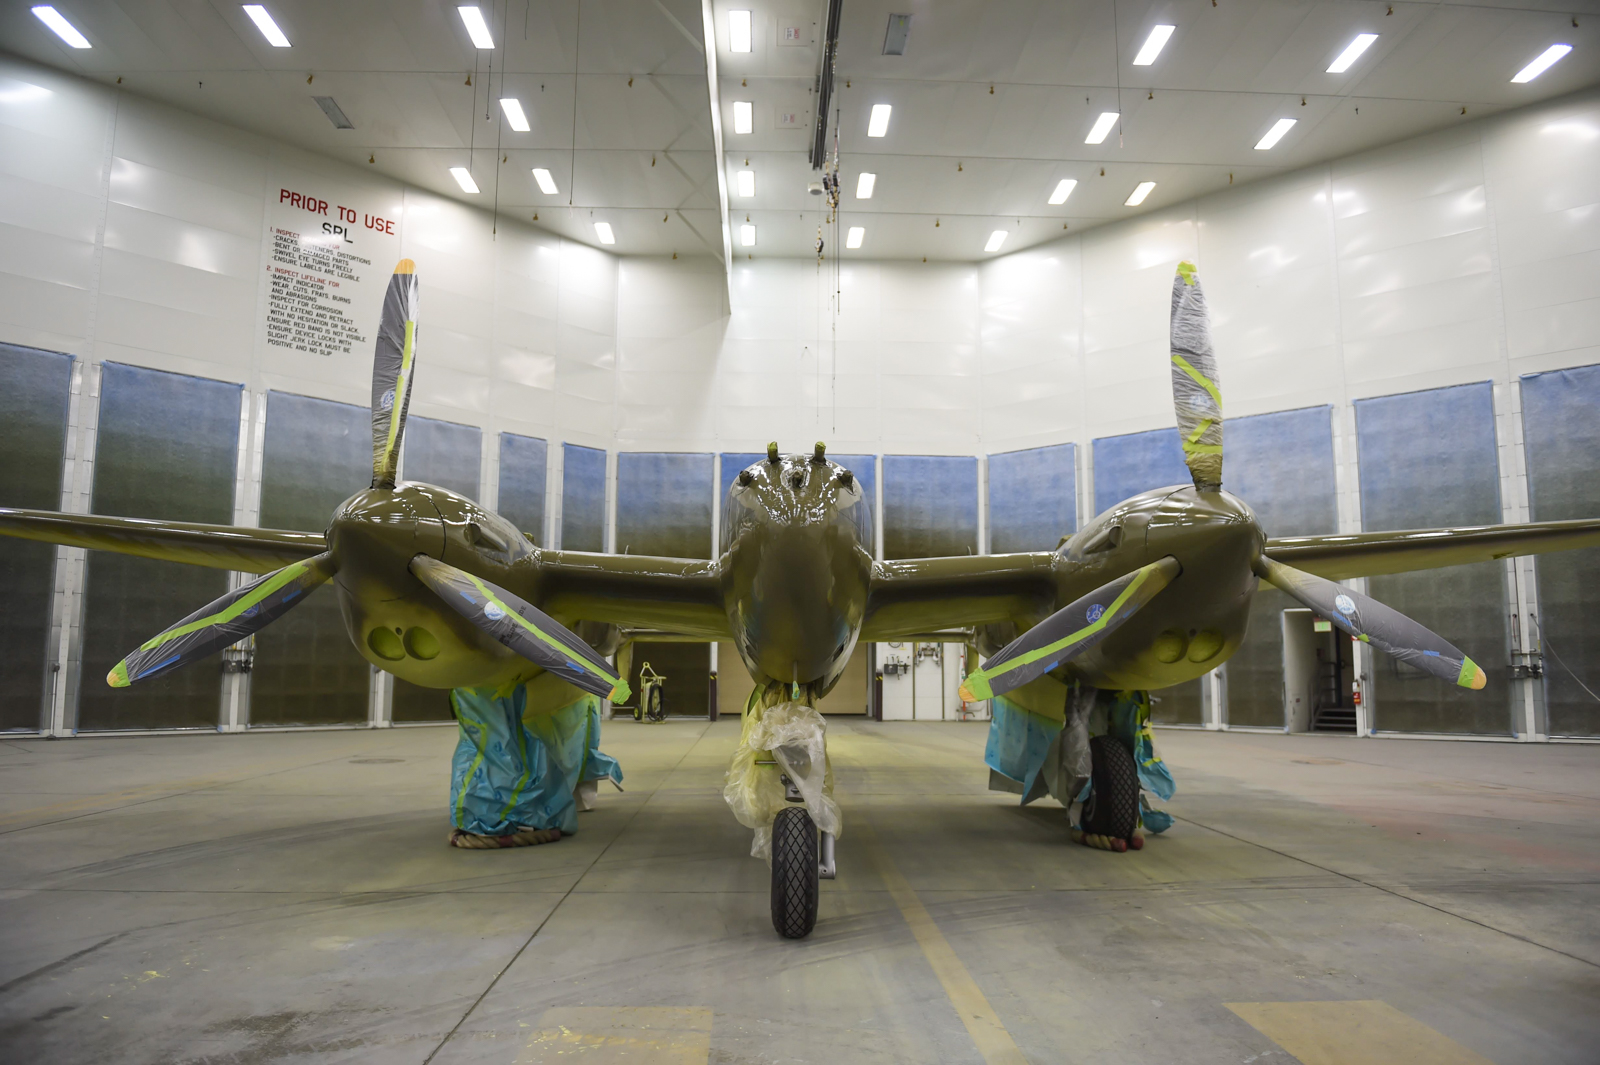 The P-38G Lightning sits inside Hangar 21 at Joint Base Elmendorf-Richardson, Alaska, July 20, 2017. The Lightning has been under restoration since August 2016. This particular P-38 saw action in World War II with the 54th Fighter Squadron in the Aleutians, where it crashed on Attu Island on Jan. 1, 1945. The P-38G Lightning is the only G model in existence and is one of fewer than 30 P-38s remaining in the world. (Photo By: Staff Sgt. Sheila deVera)